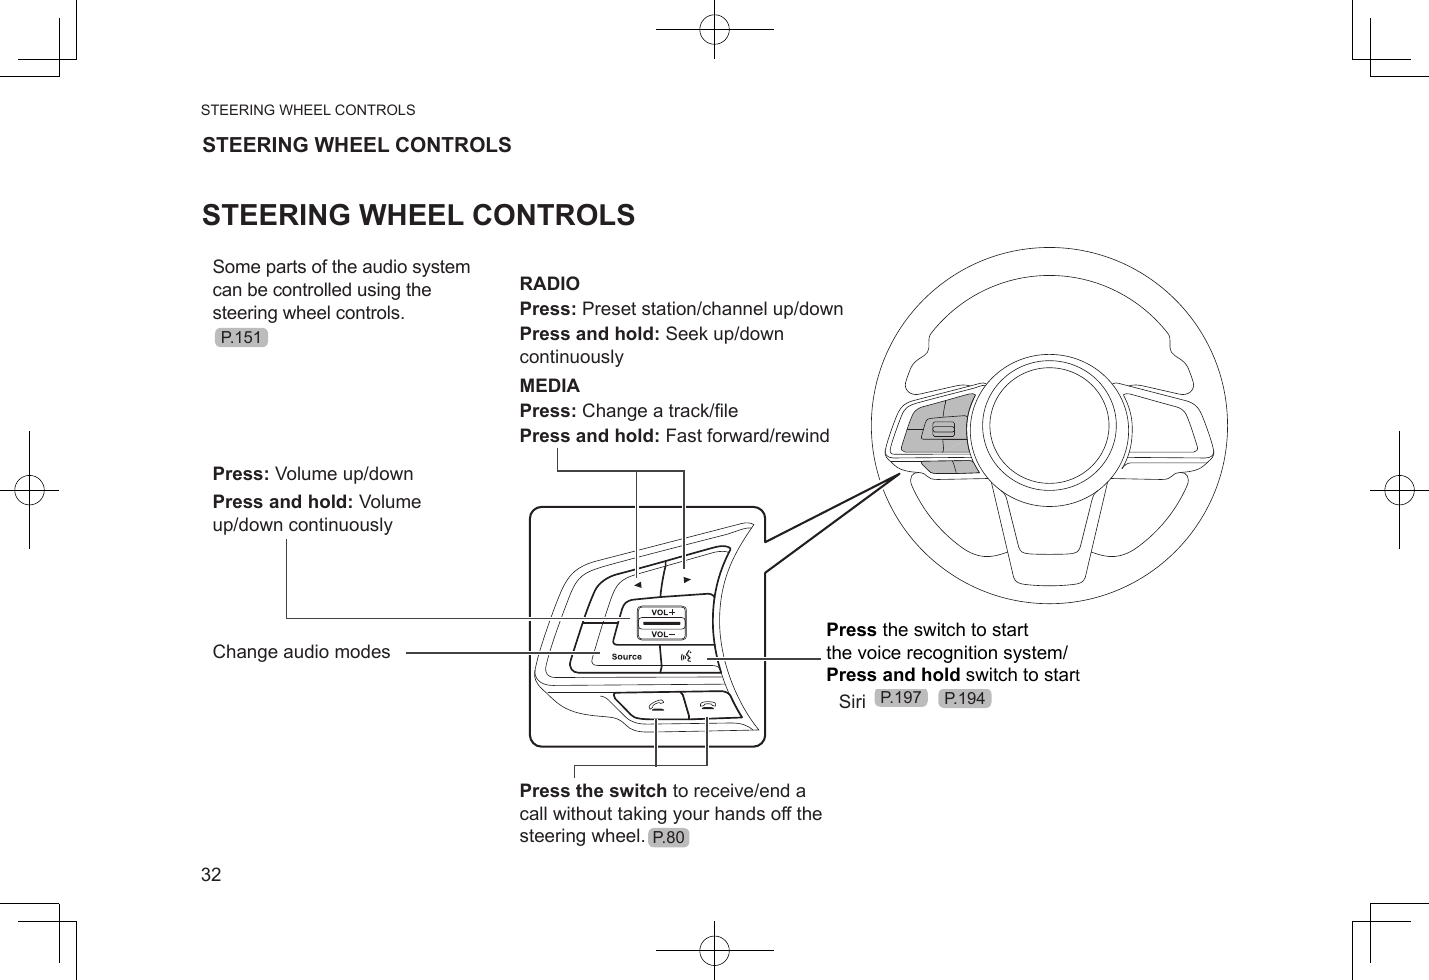 STEERING WHEEL CONTROLS32STEERING WHEEL CONTROLSSTEERING WHEEL CONTROLSSome parts of the audio system can be controlled using the steering wheel controls.RADIOPress: Preset station/channel up/downPress and hold: Seek up/down continuouslyMEDIAPress: Change a track/lePress and hold: Fast forward/rewindPress: Volume up/downPress and hold: Volume up/down continuouslyChange audio modes Press the switch to start  the voice recognition system / SiriPress the switch to receive/end a  call without taking your hands off the  steering wheel.P.151P.197 P.194P.80Press the switch to start the voice recognition system/Press and hold switch to start